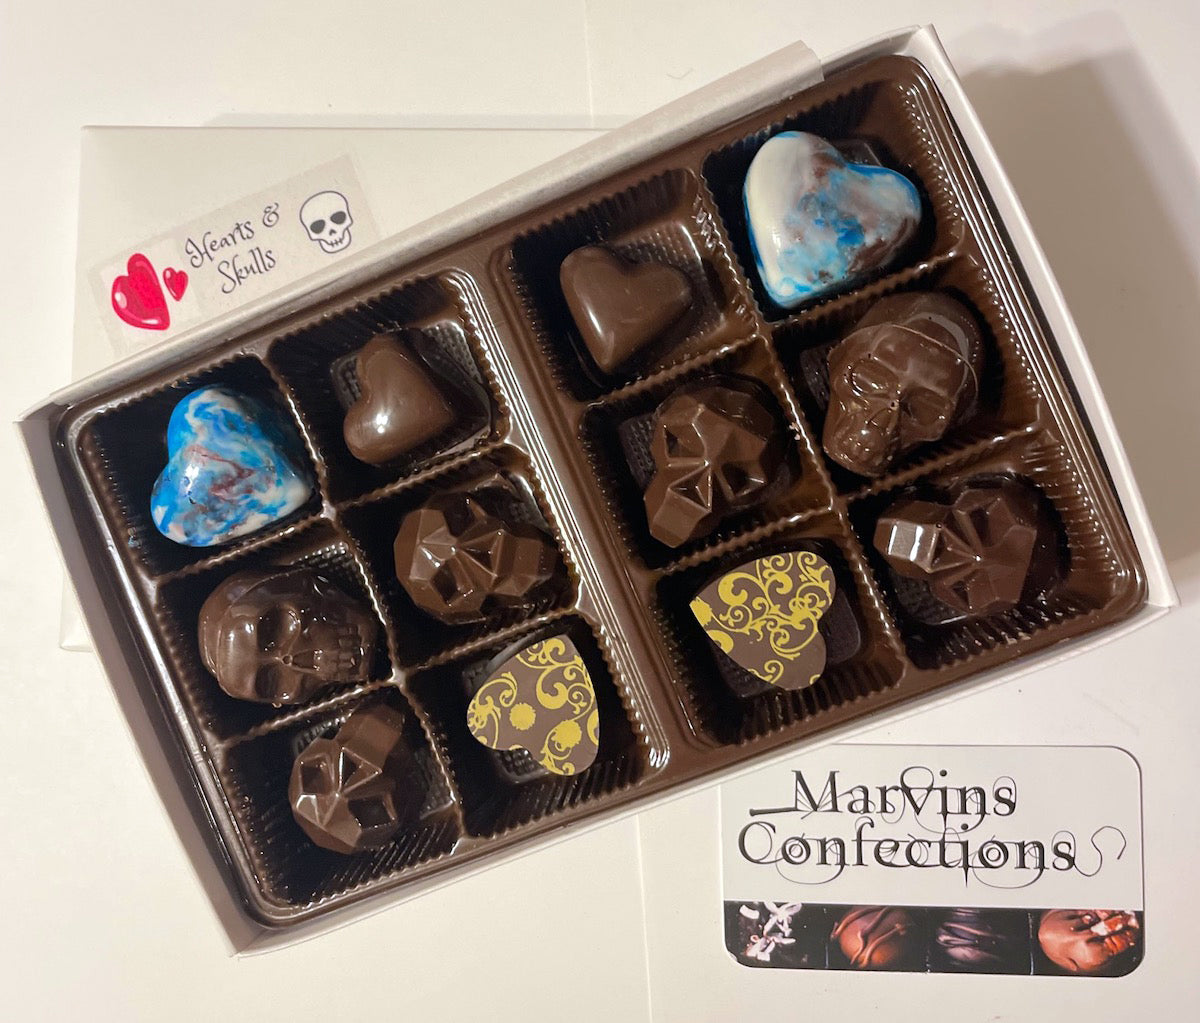 Hearts and Skulls 12-Piece Valentine's Day Gift Box. This devastatingly deliciously dark collection includes cookie butter, maple pecan cinnamon, and penuche--everything to make your Valentine swoon.  Marvin's Confections based in Charlotte, North Carolina.